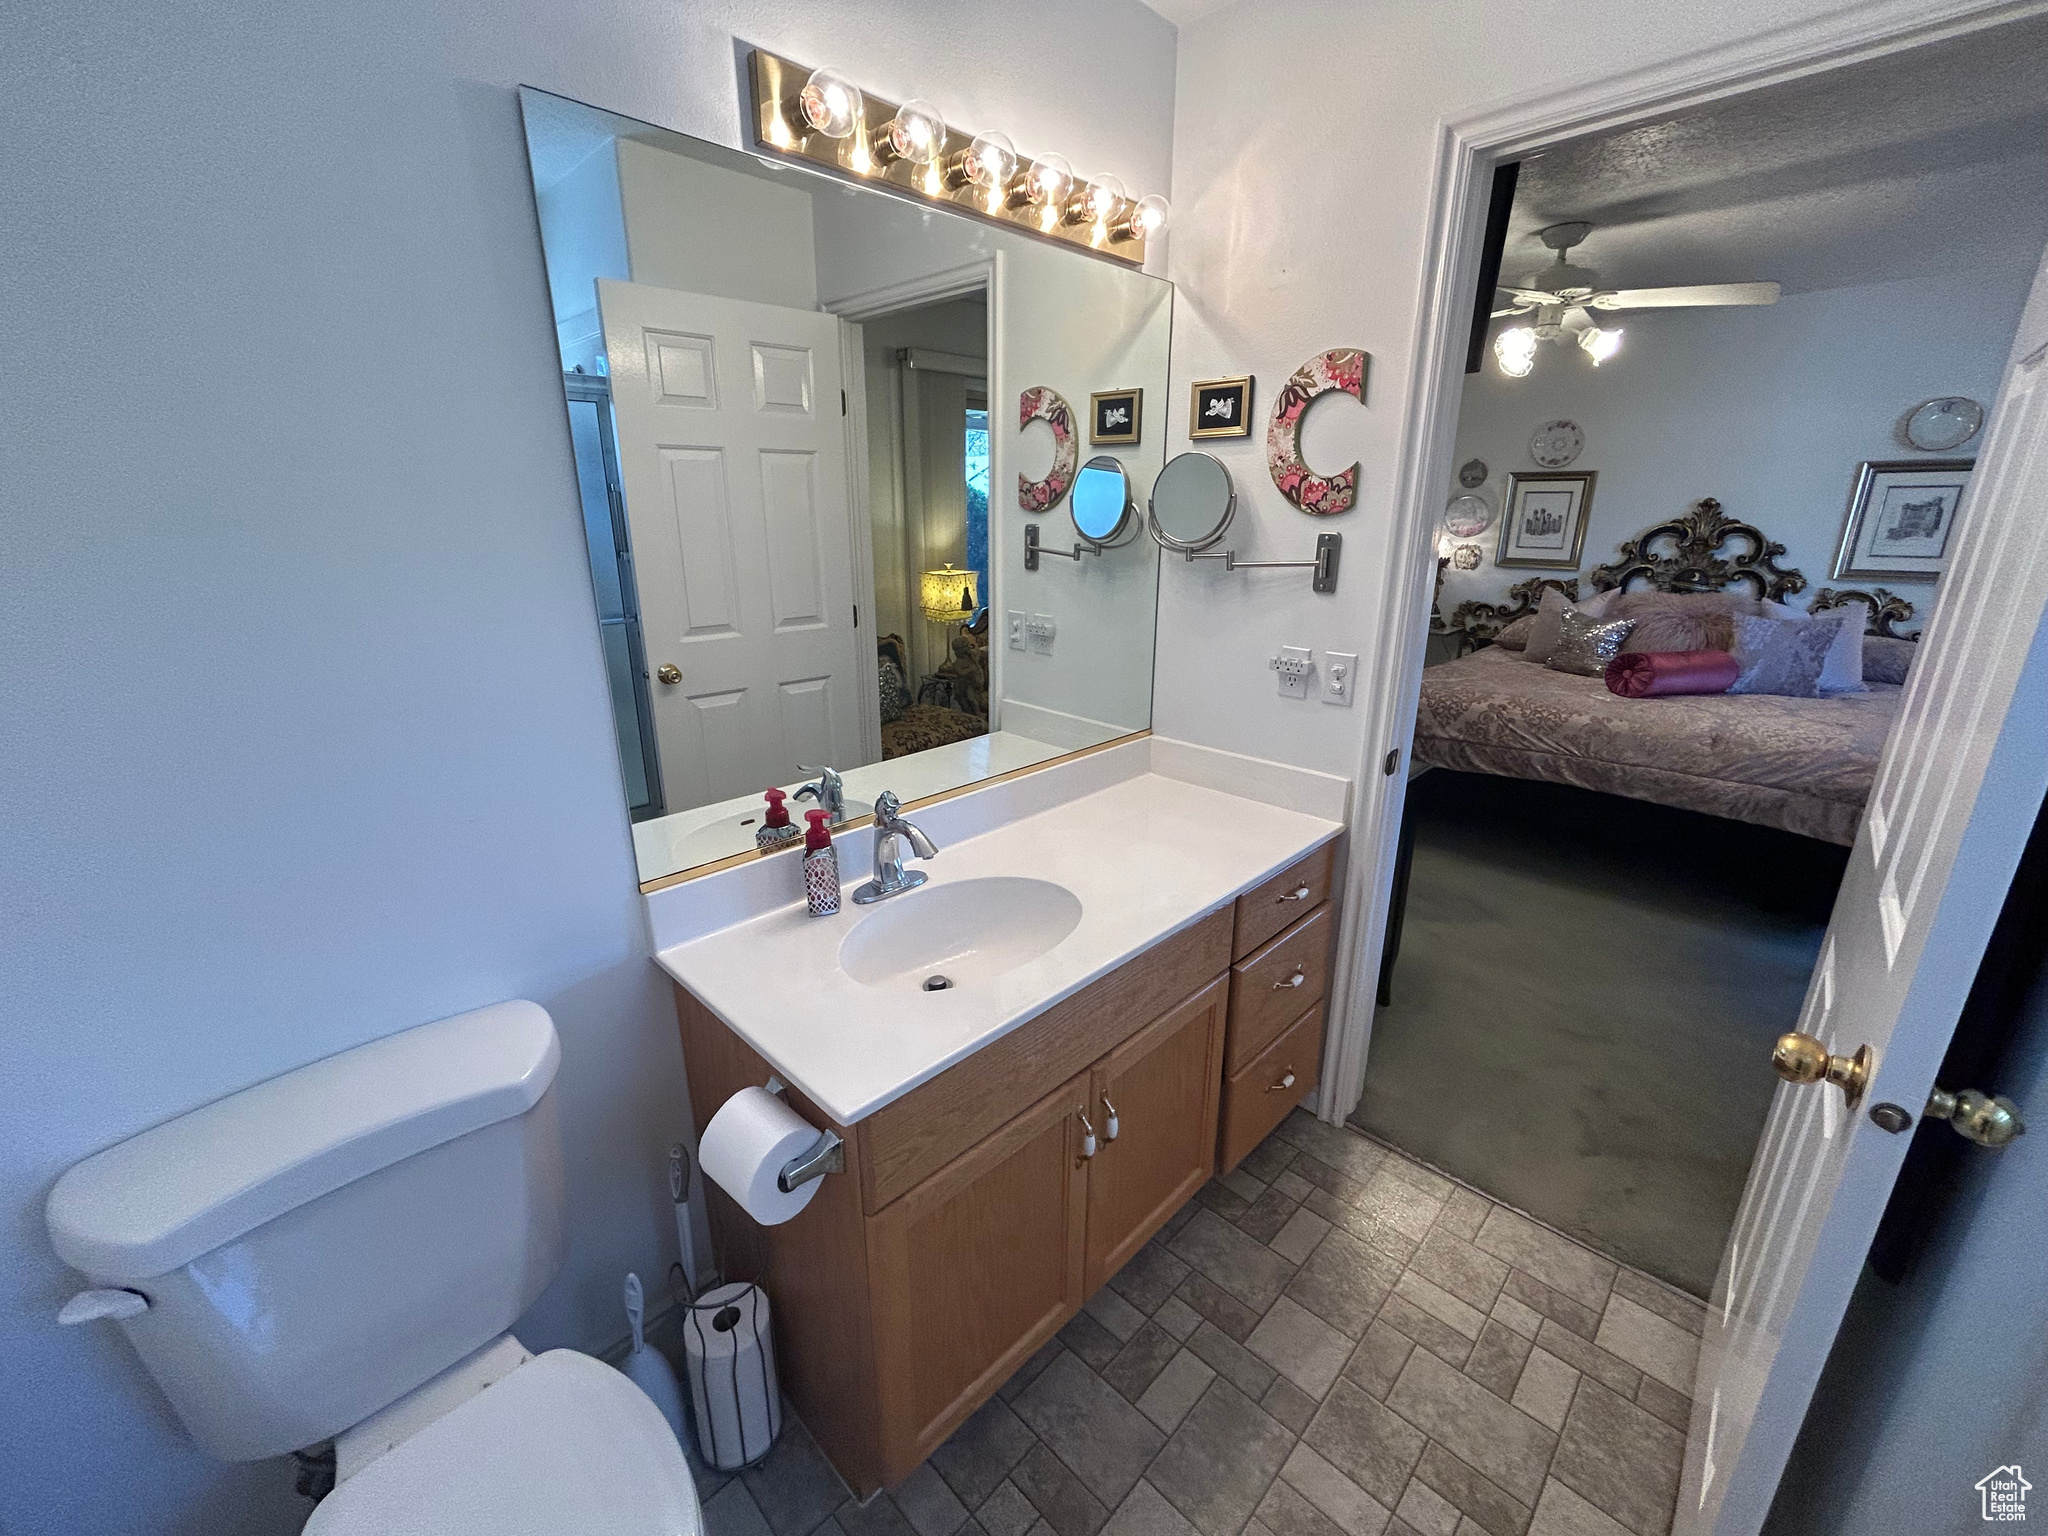 Bathroom featuring vanity with extensive cabinet space, toilet, tile flooring, and ceiling fan